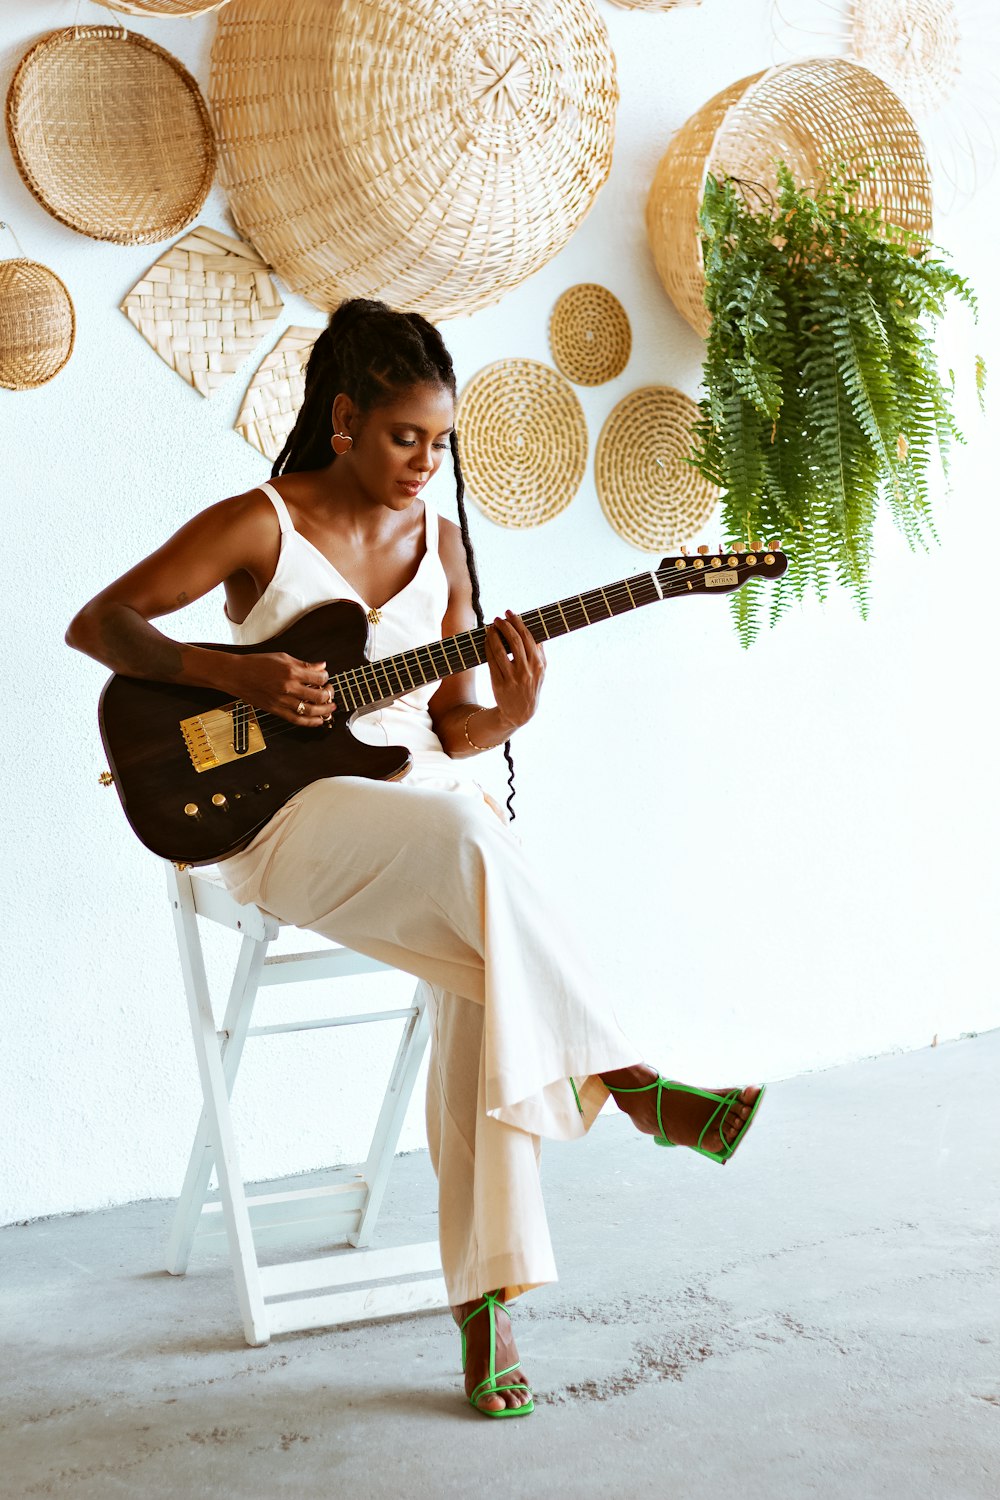 a woman sitting on a chair playing a guitar